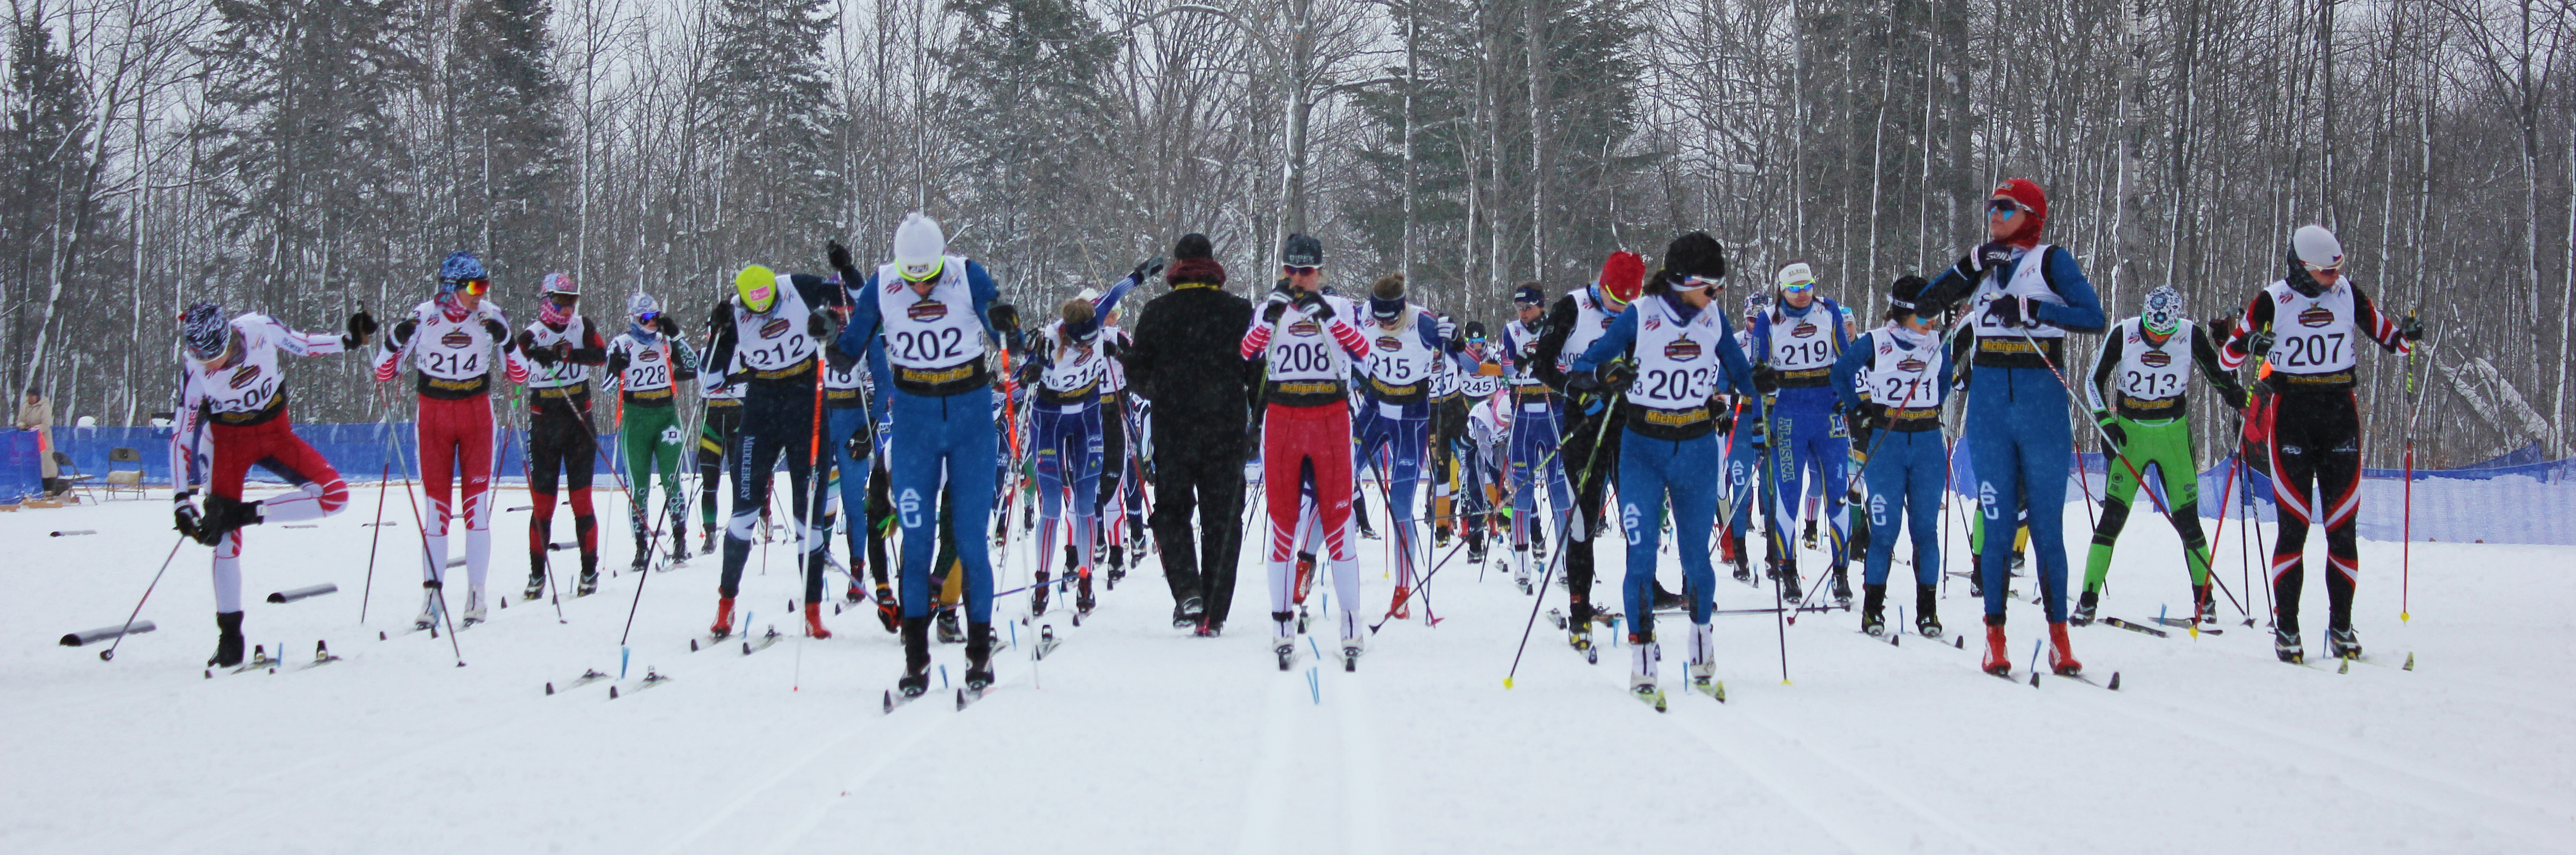 The start of the women's 20 k classic mass start at the 2015 U.S. Cross Country Championships in Houghton, Mich. 